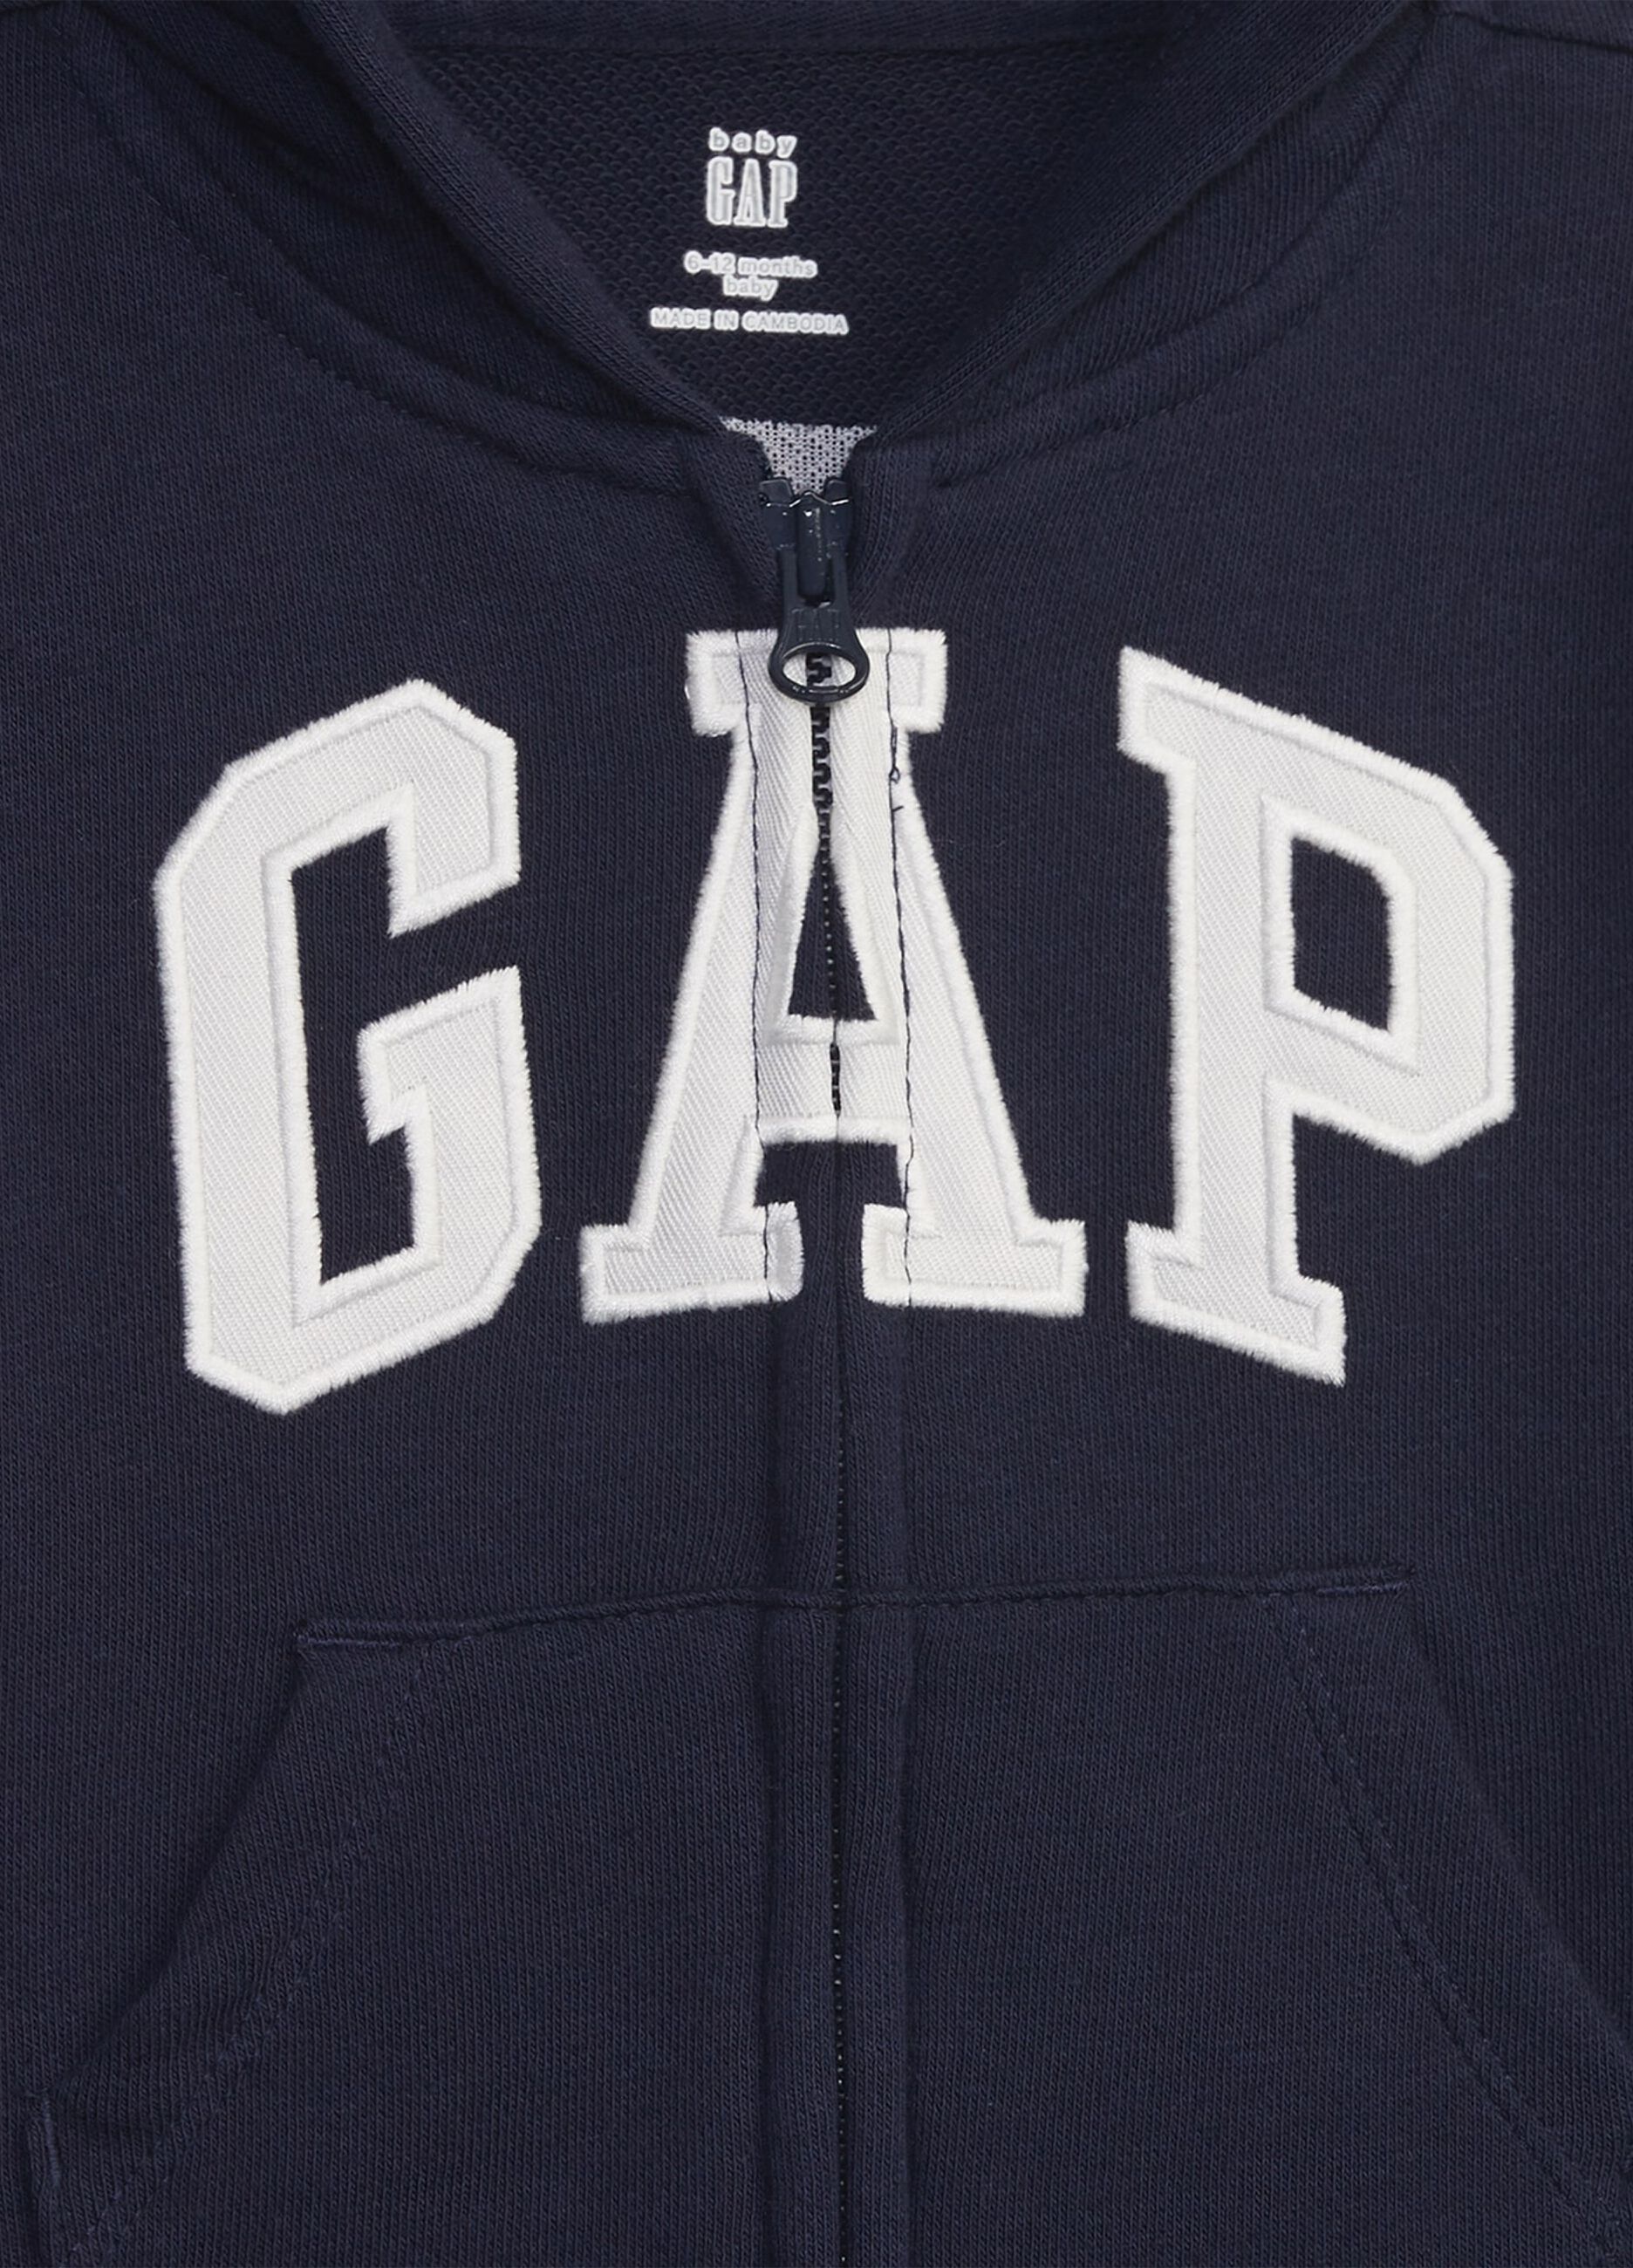 Full-zip hoodie with logo patch